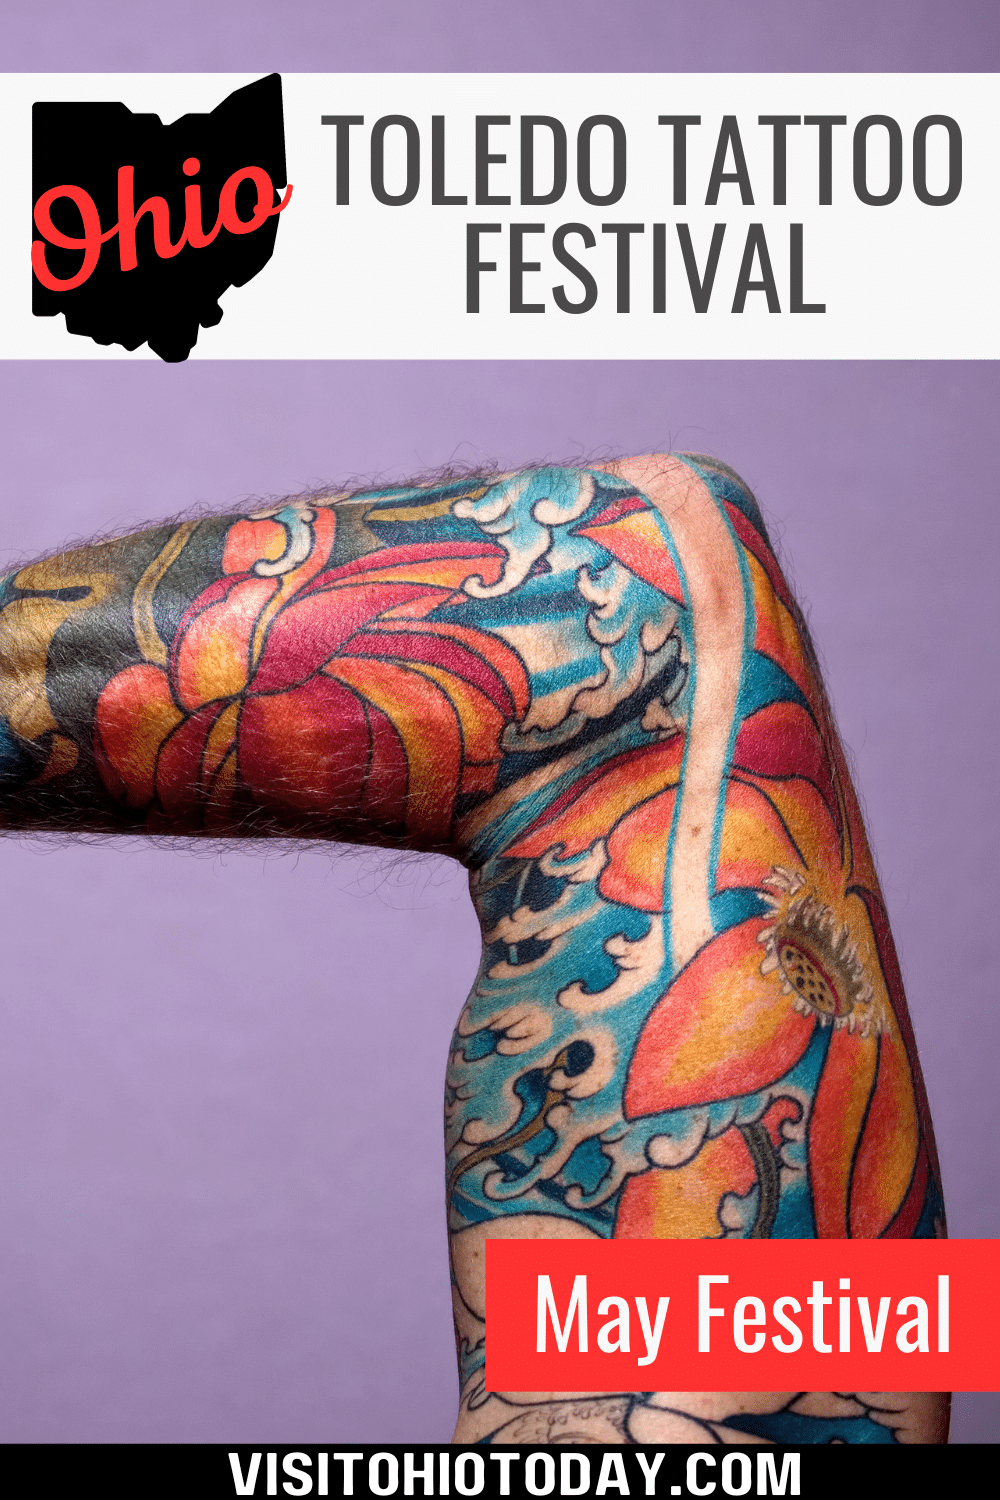 The Toledo Tattoo Festival is held in early May. The event features over 200 tattoo artists, vendors, craftspeople, and tattoo competitions.